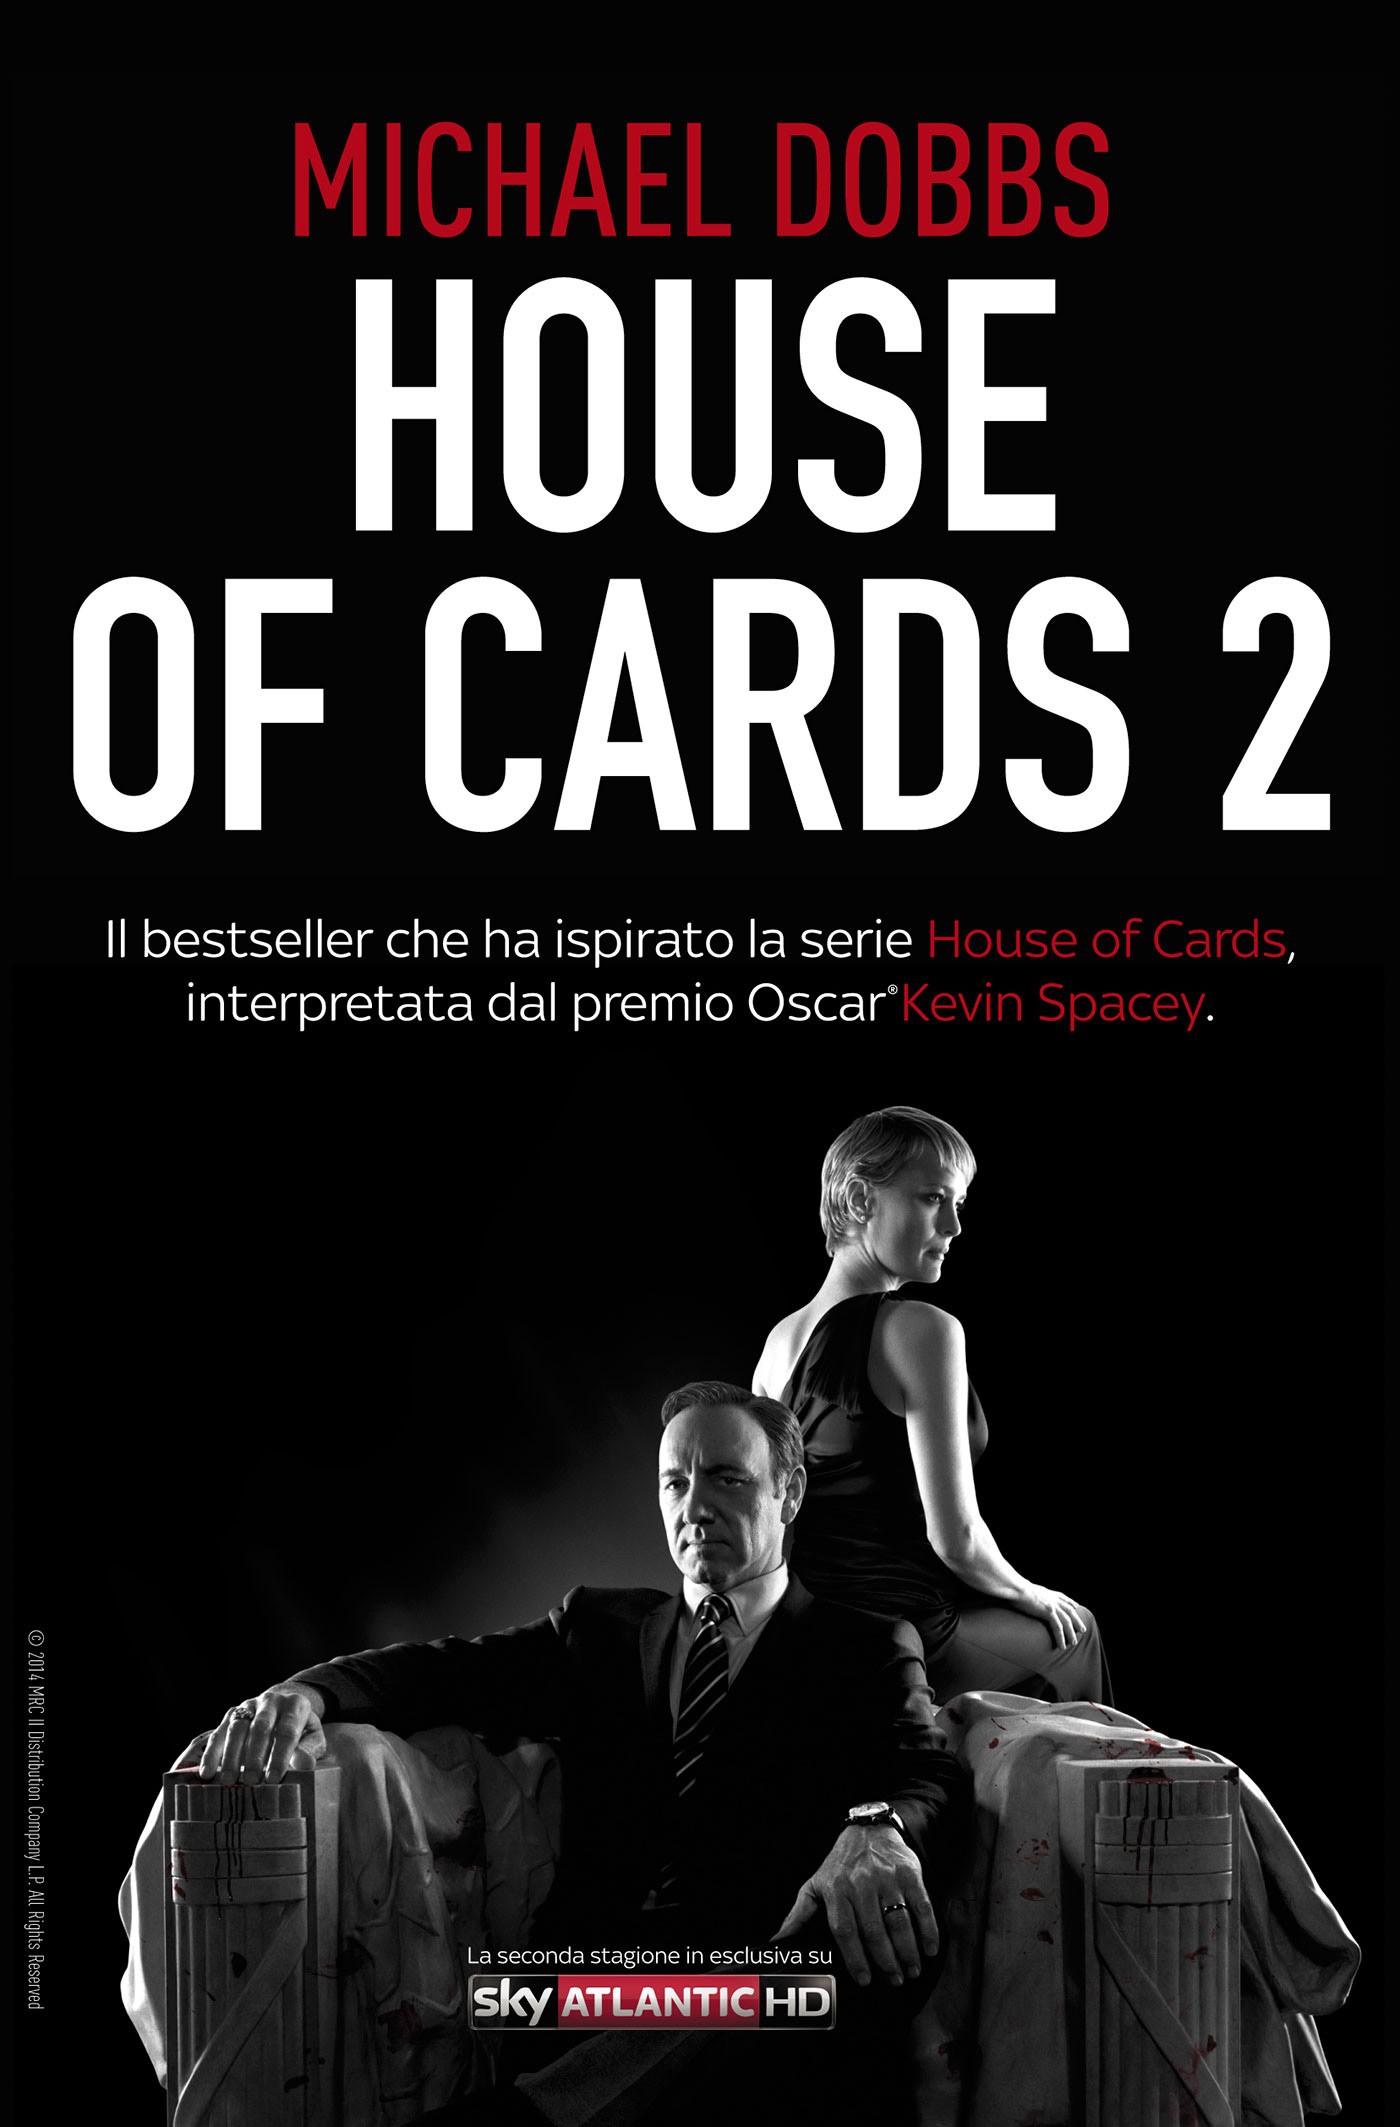 House of Cards 2 Scacco al re - Librerie.coop